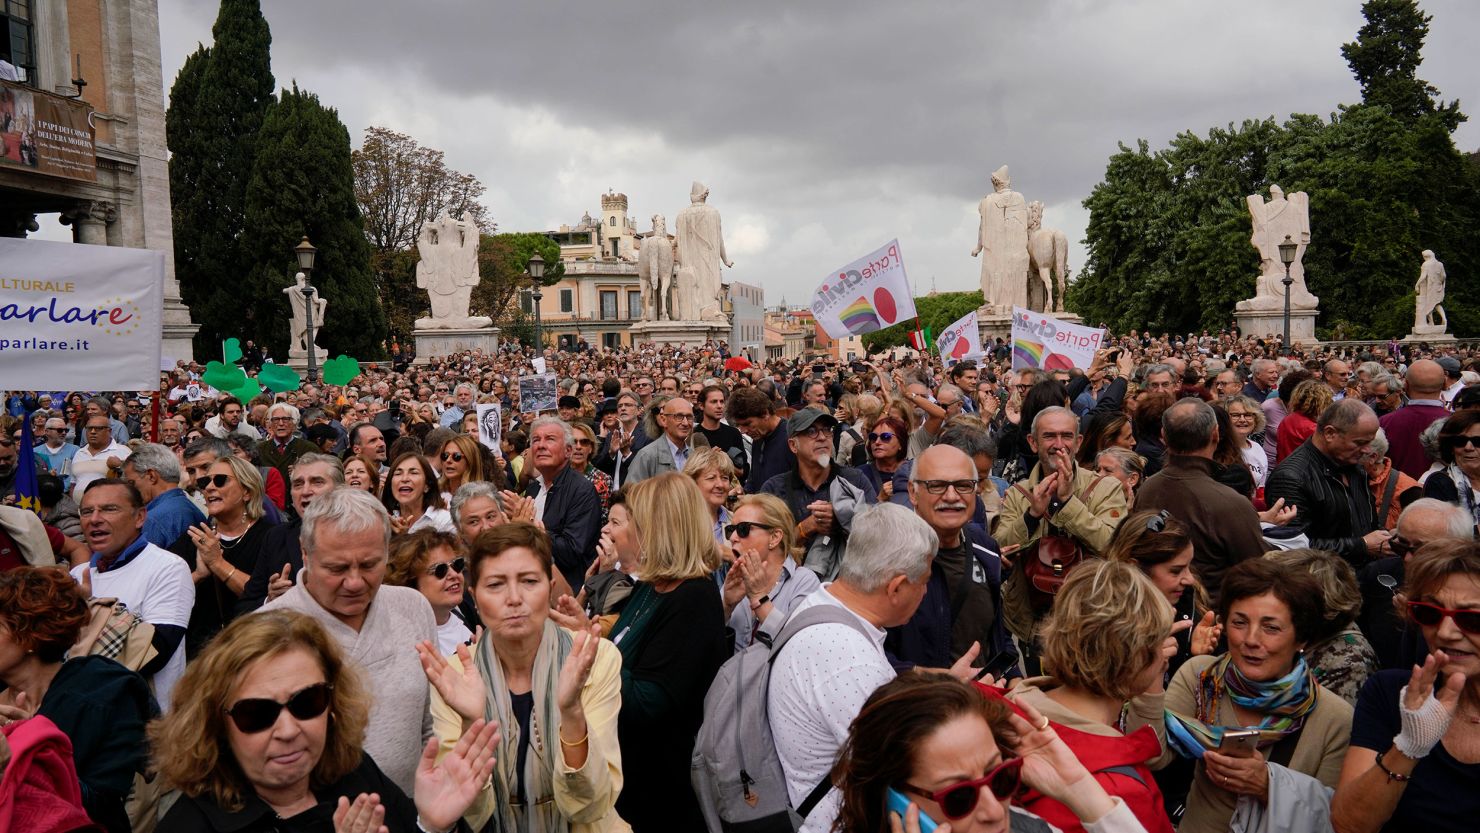 Rome's citizens, fed up of the ongoing decay of the city, demonstrate in central Rome on Saturday.